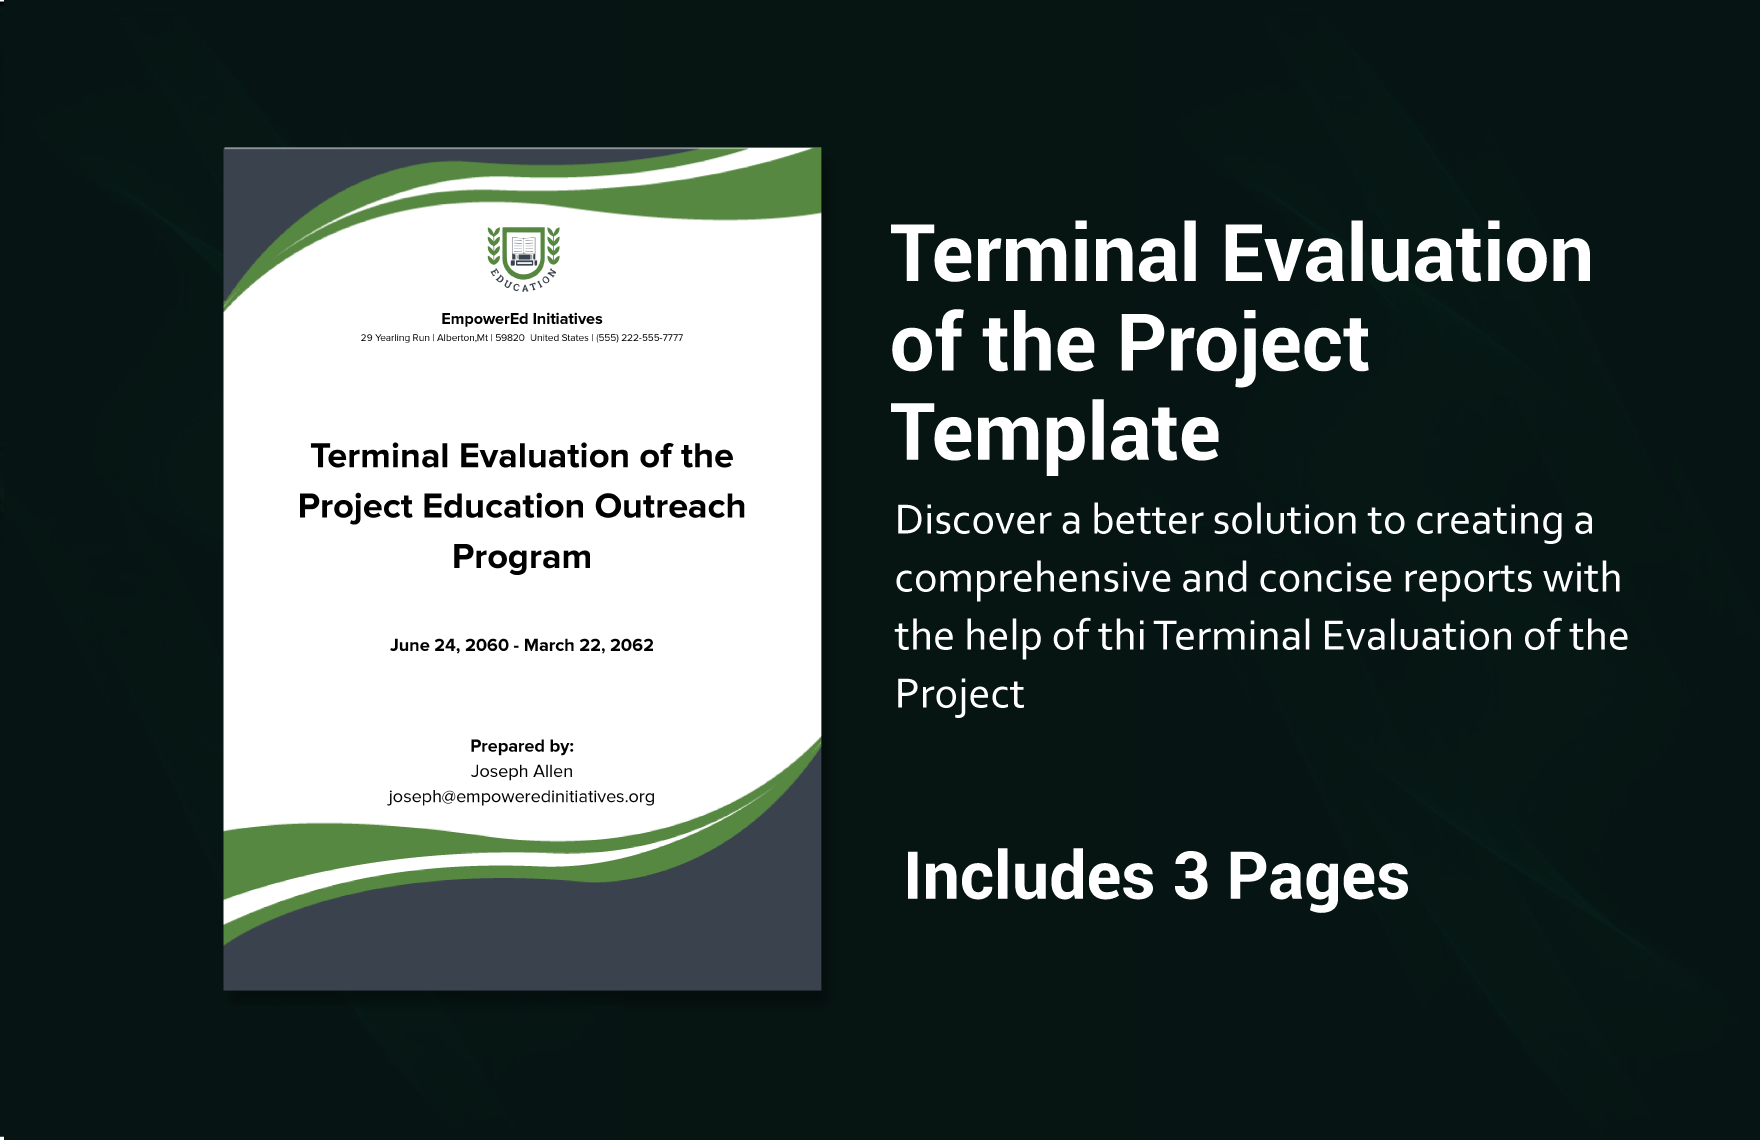 Terminal Evaluation of the Project Template